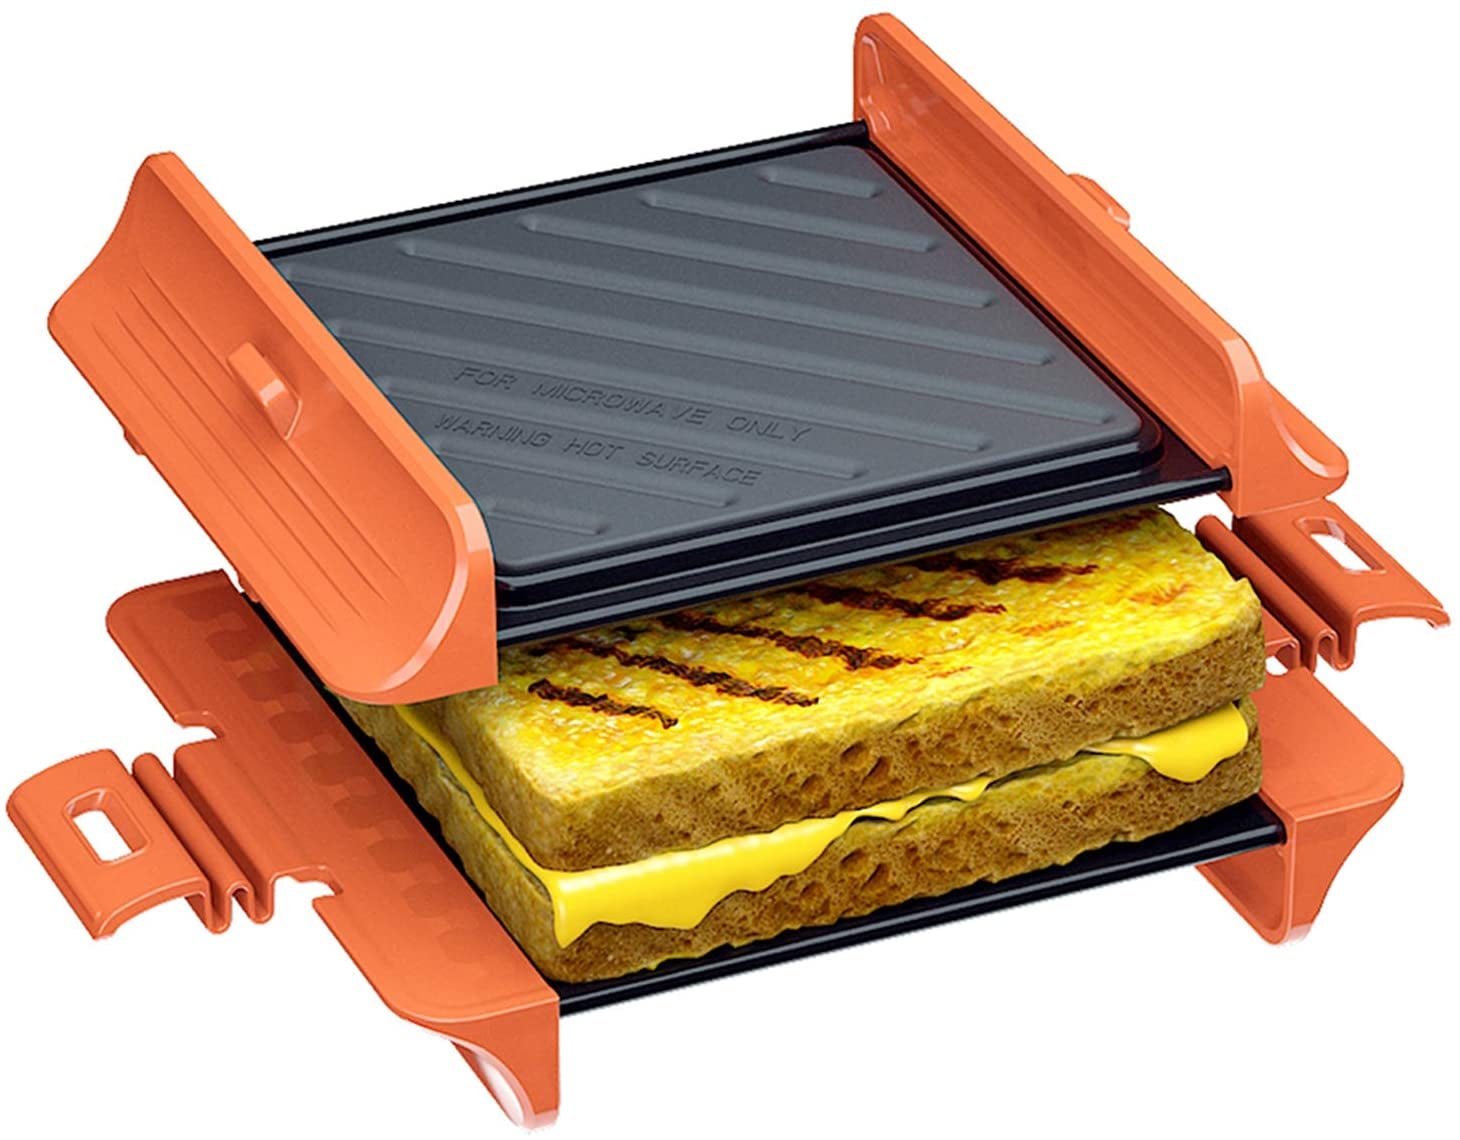 a grilled cheese sandwich in the sandwich maker